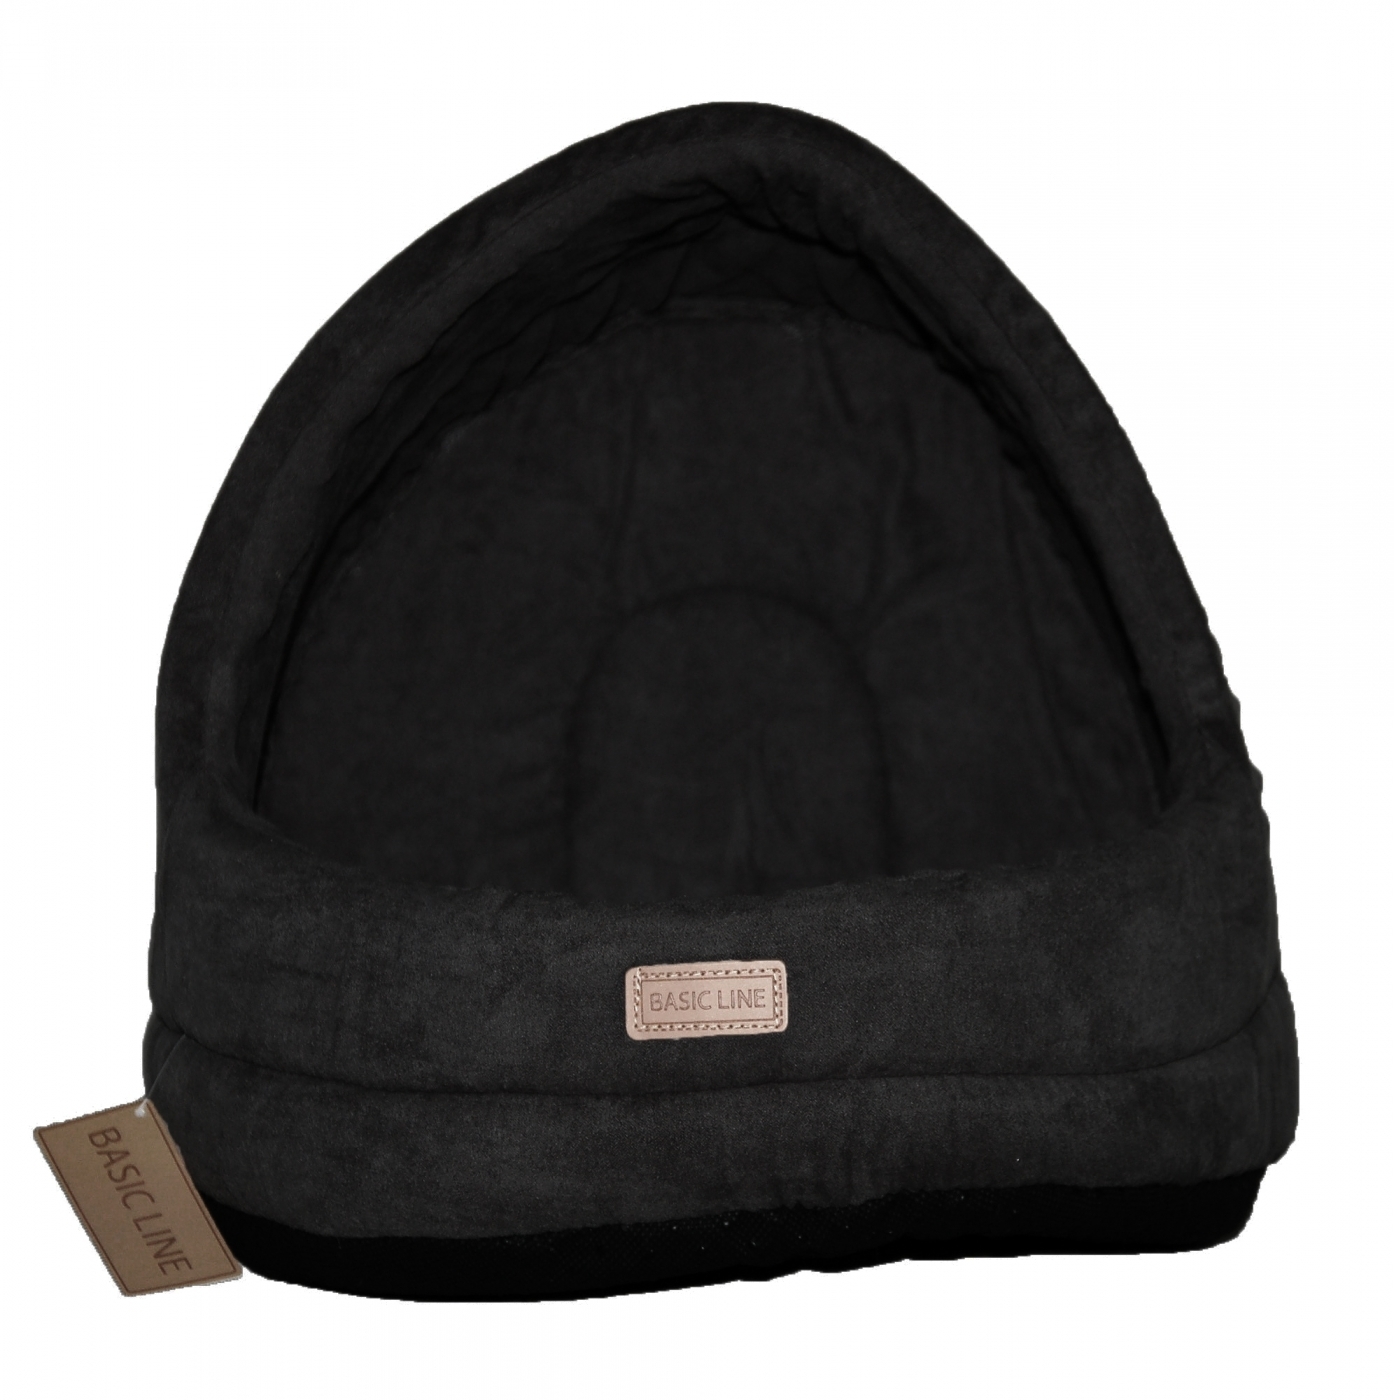 CAPAZO SUEDE DOME BASIC LINE CAT NEGRO